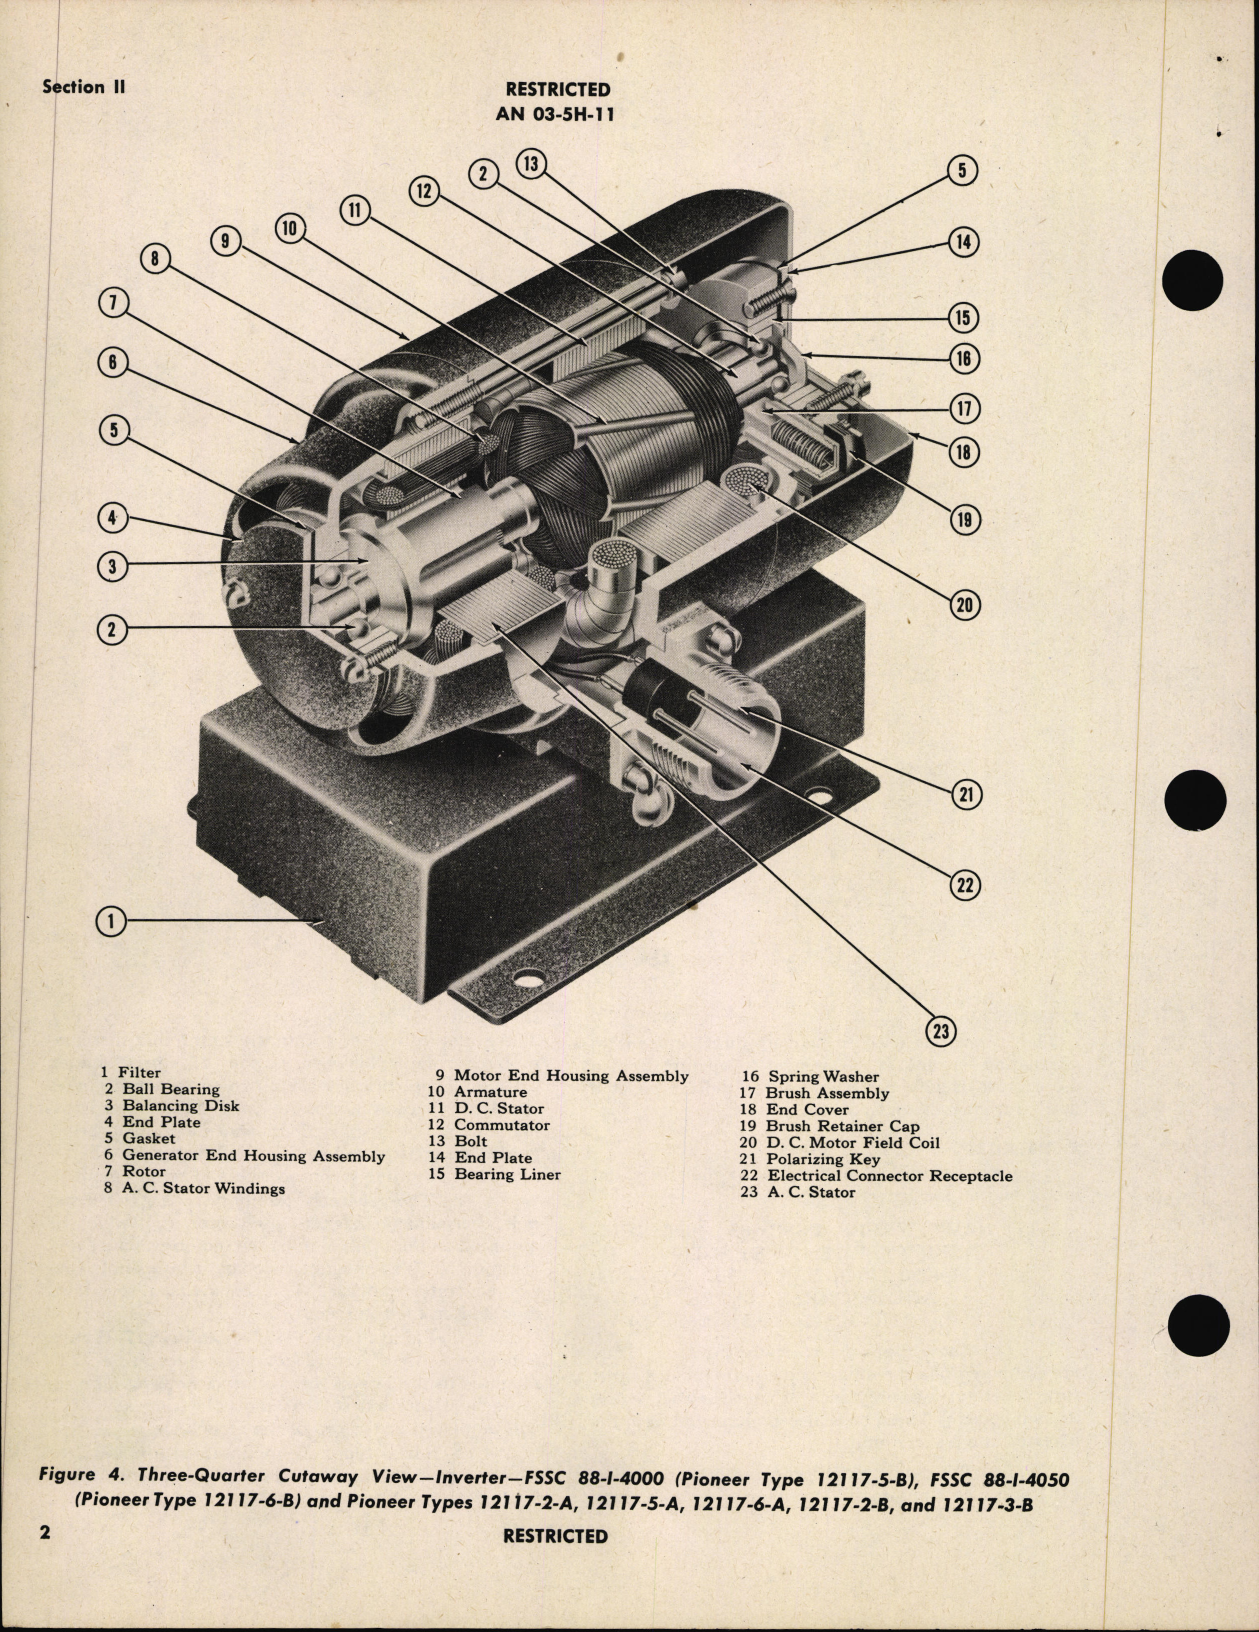 Sample page 6 from AirCorps Library document: Handbook of Instructions with Parts Catalog for Inverters